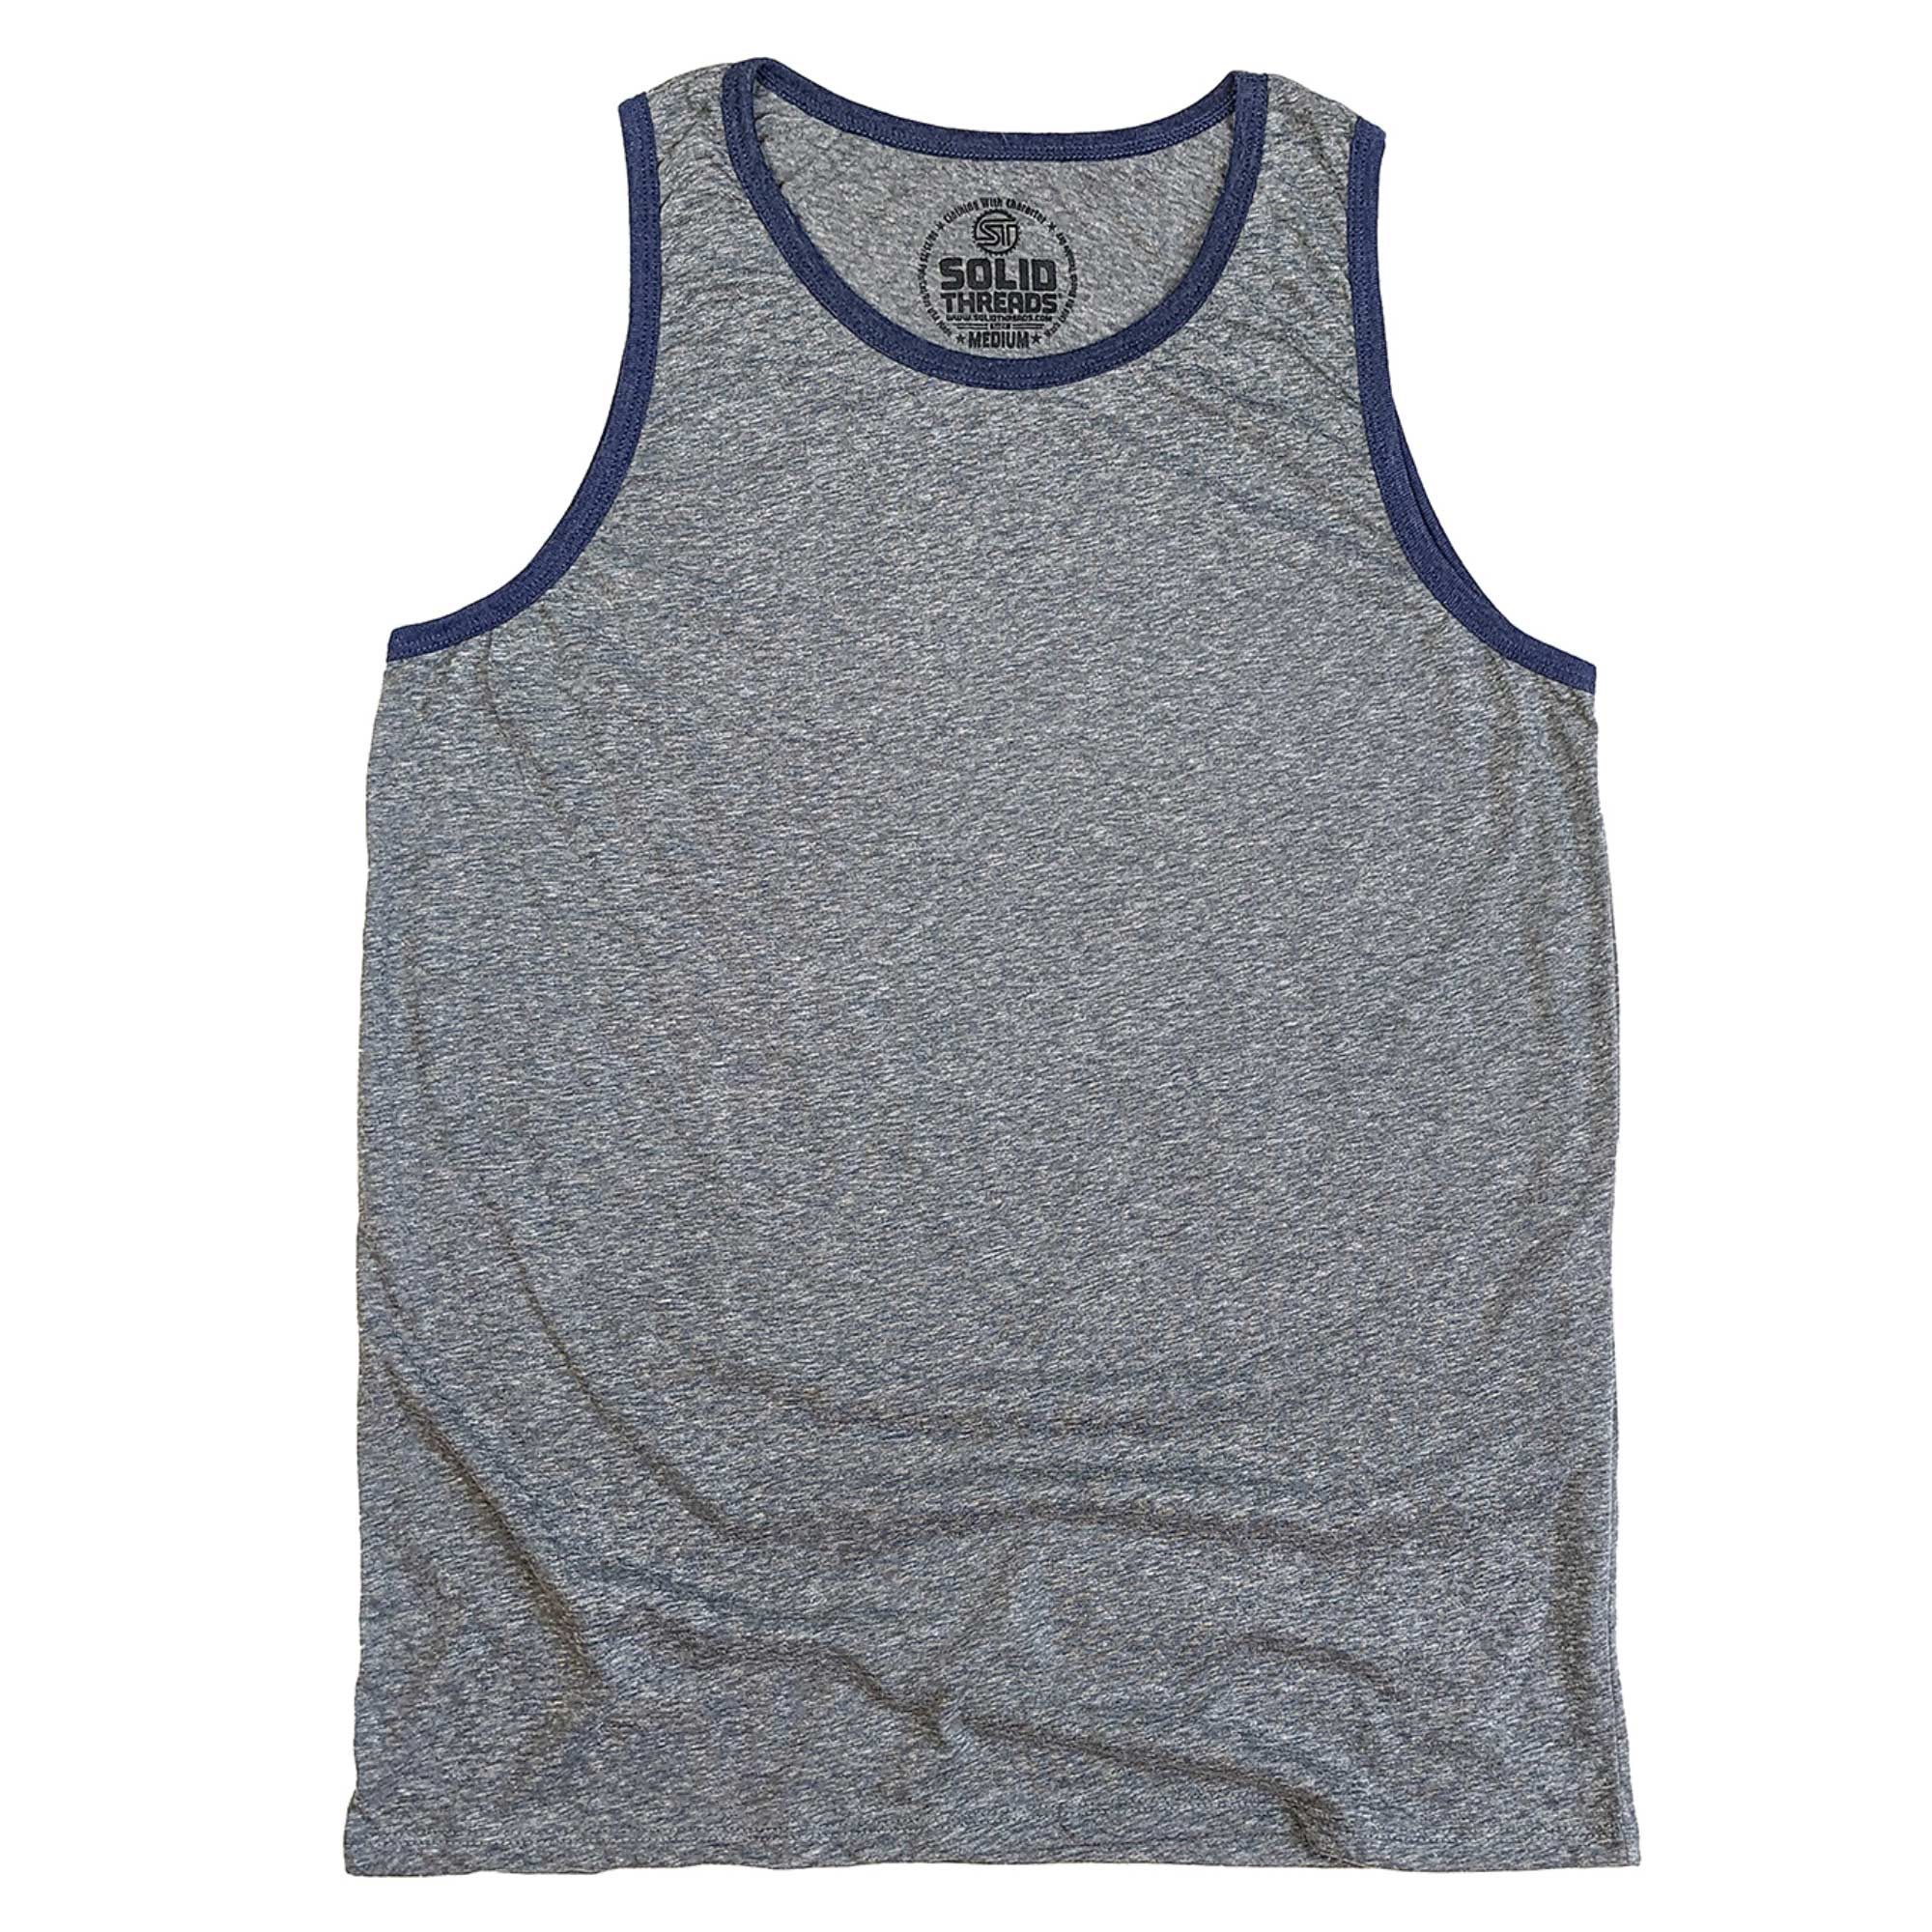 Men's Solid Threads Retro Ringer Tank Top Triblend Grey/Navy | Vintage Inspired USA Made Tank Top